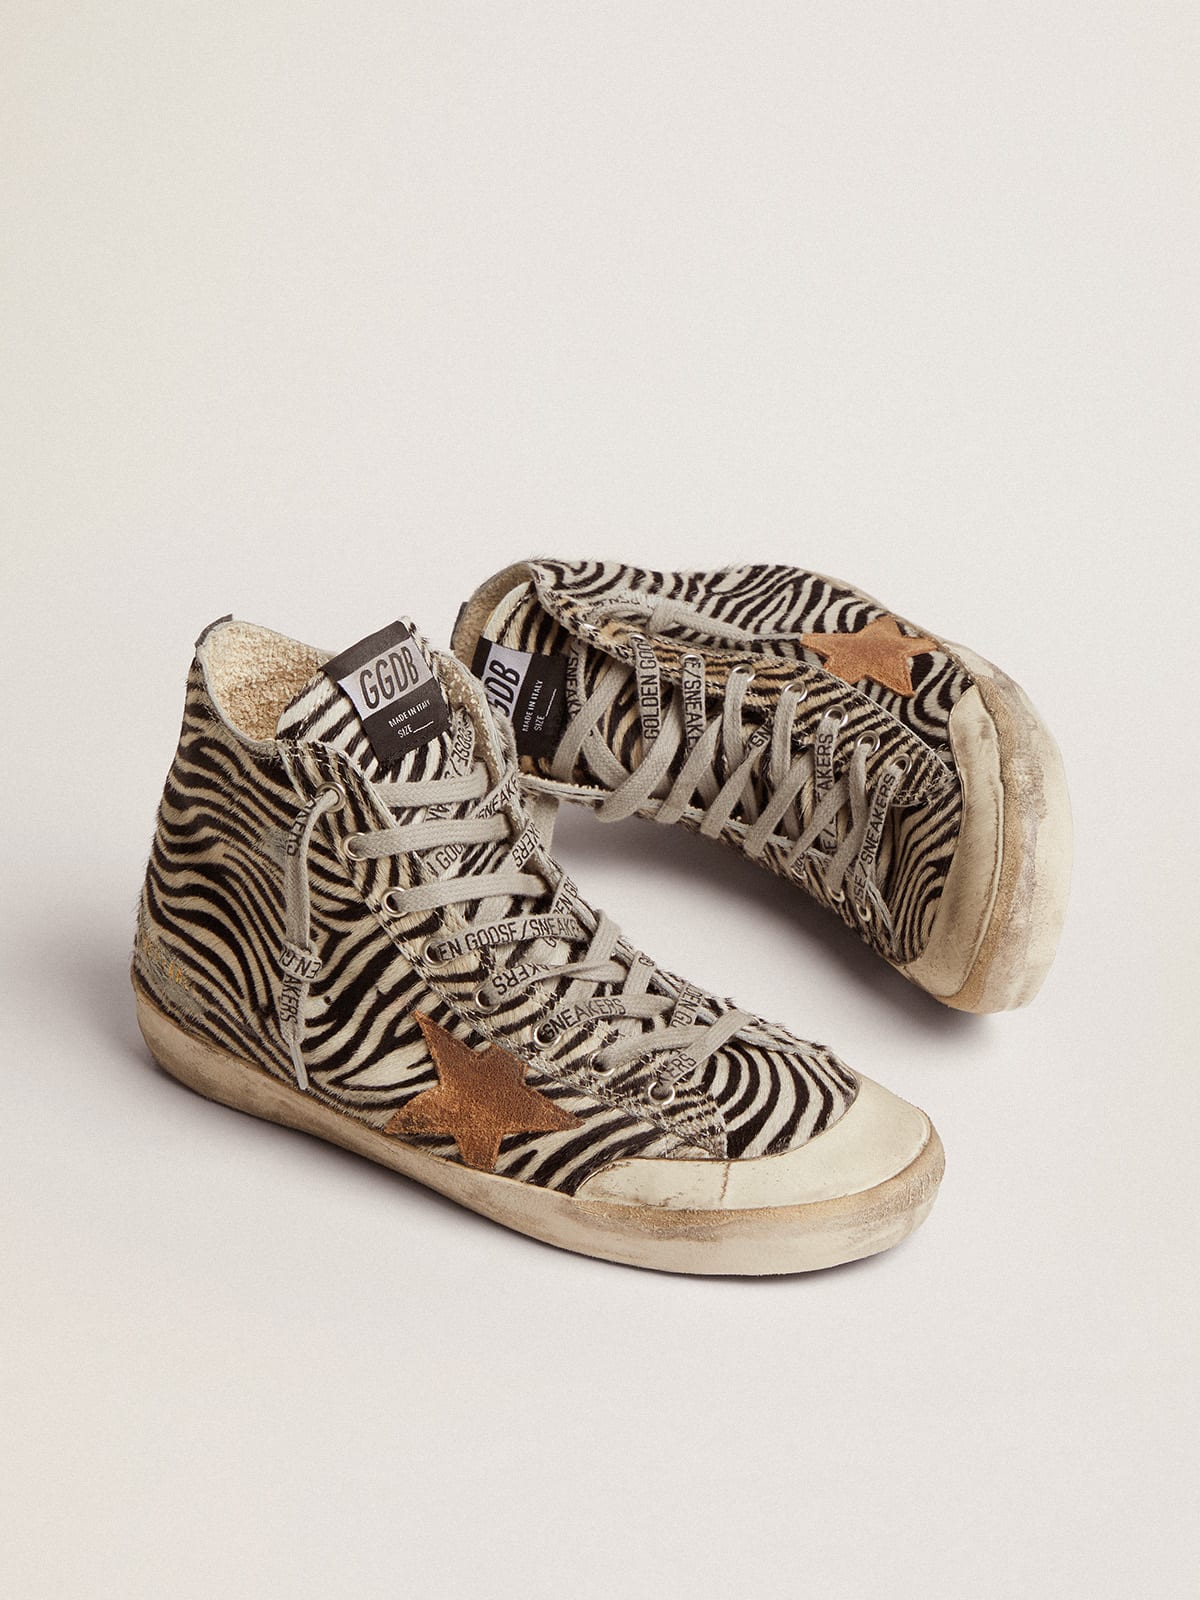 Golden Goose - Francy Penstar LTD sneakers in zebra-print pony skin with tobacco-colored suede star and black leather heel tab in 